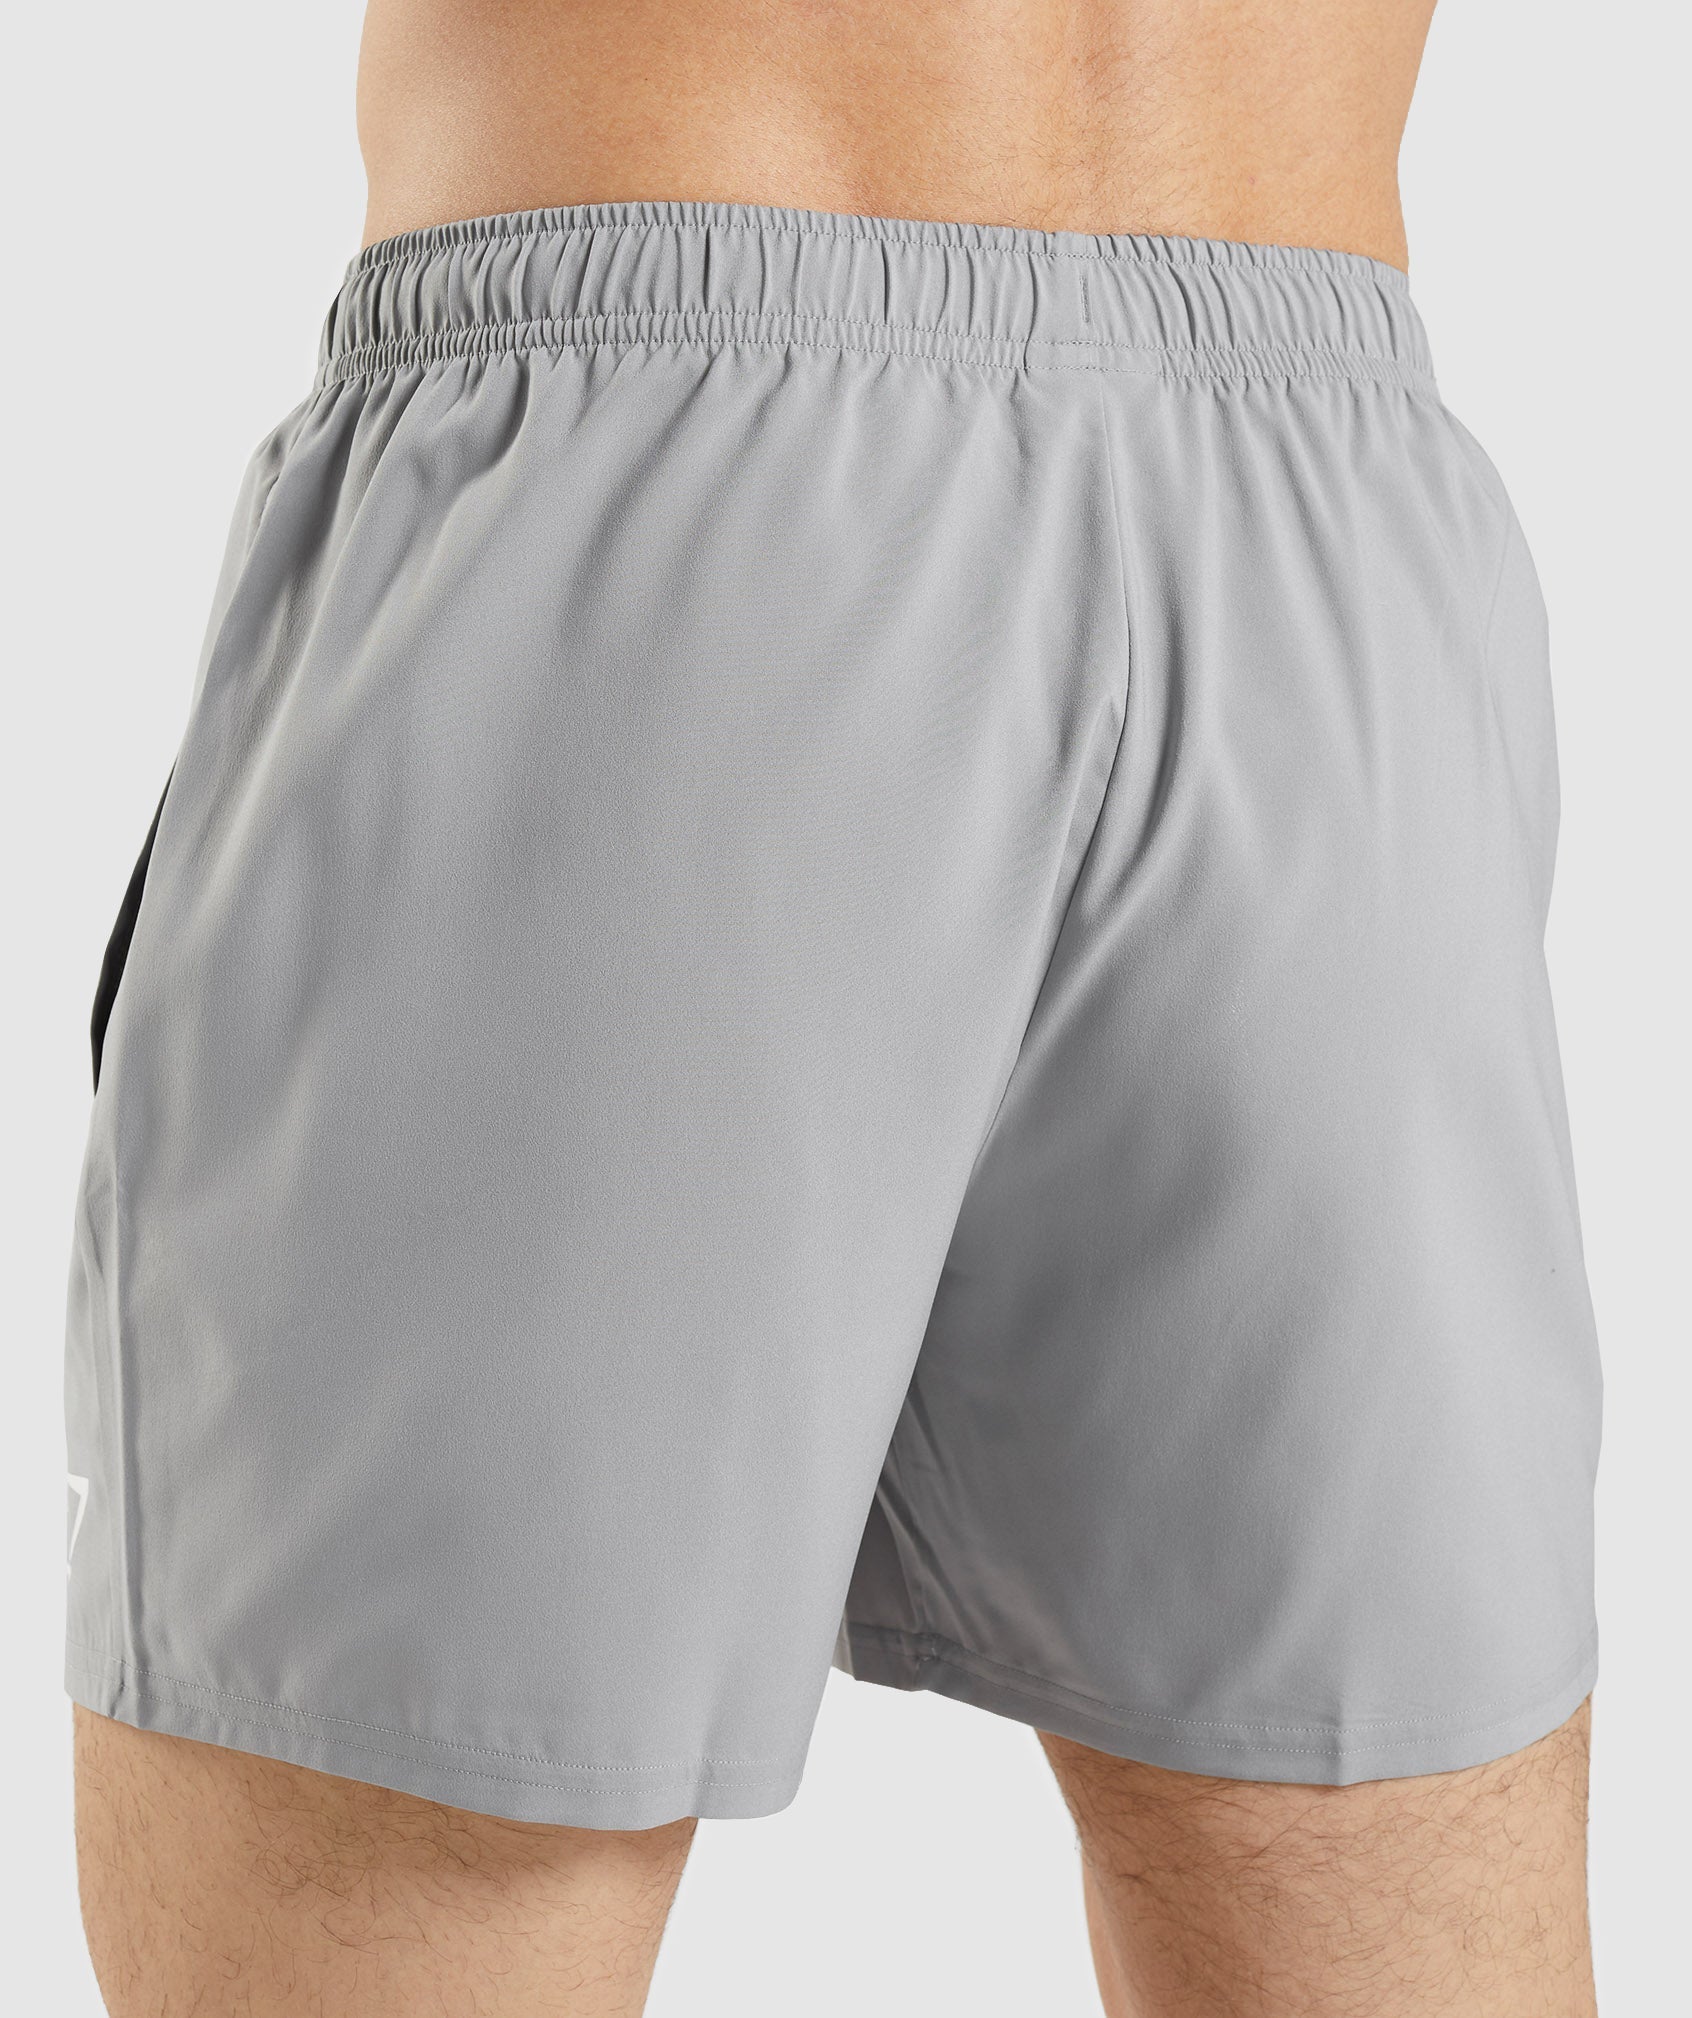 Arrival 5" Shorts in Smokey Grey - view 4